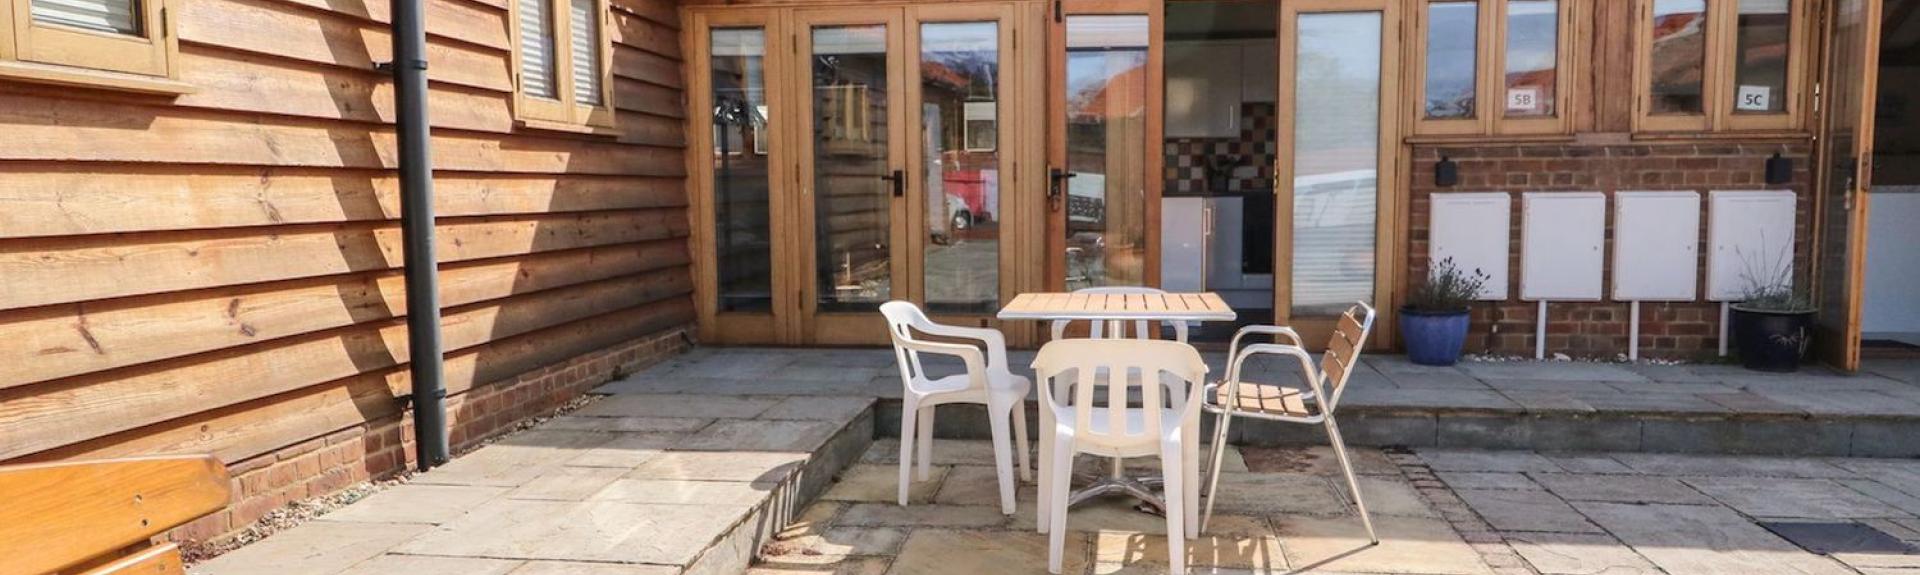 Exterior of a Hunstanton holiday cottage ovrlooking a paved courtyard with outdoor dining furniture